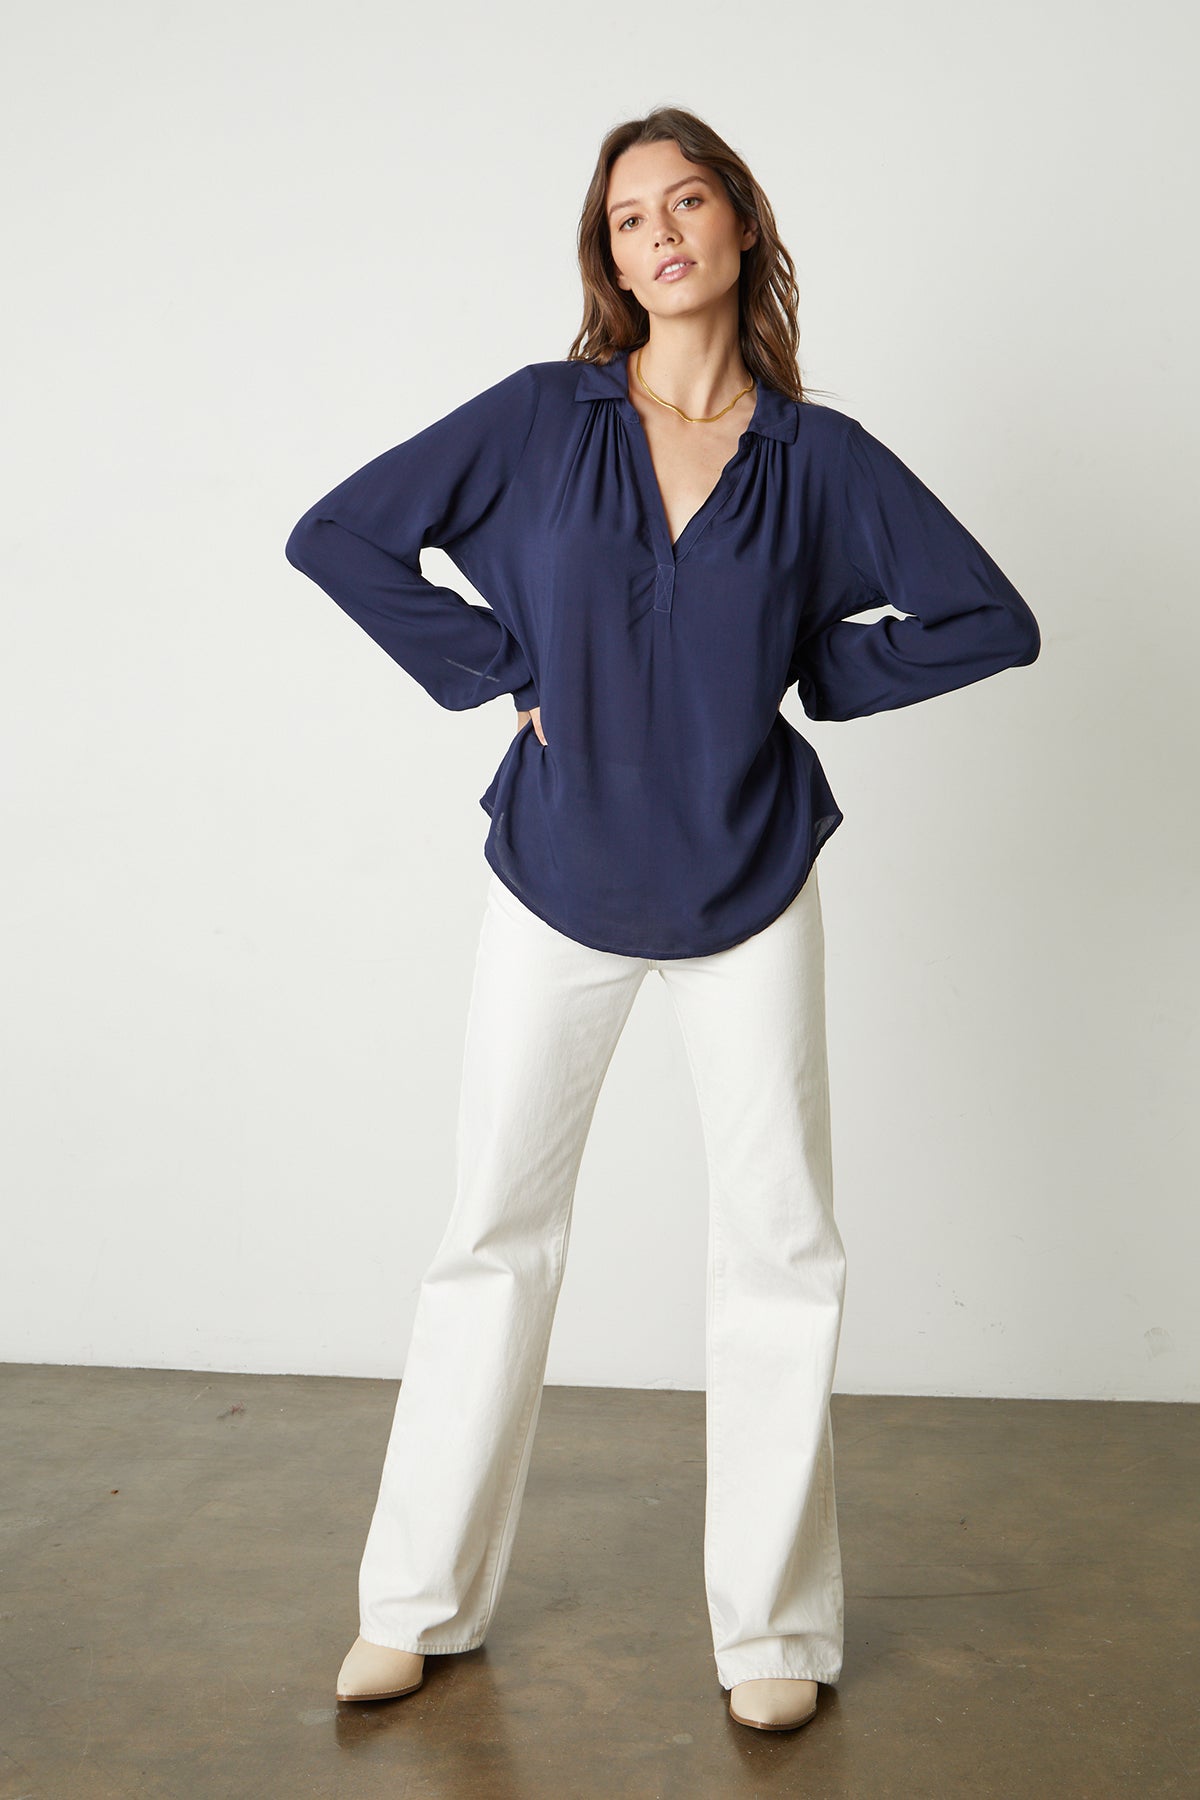   the model is wearing a Velvet by Graham & Spencer JOSEY V-NECK COLLAR TOP and white wide leg pants. 